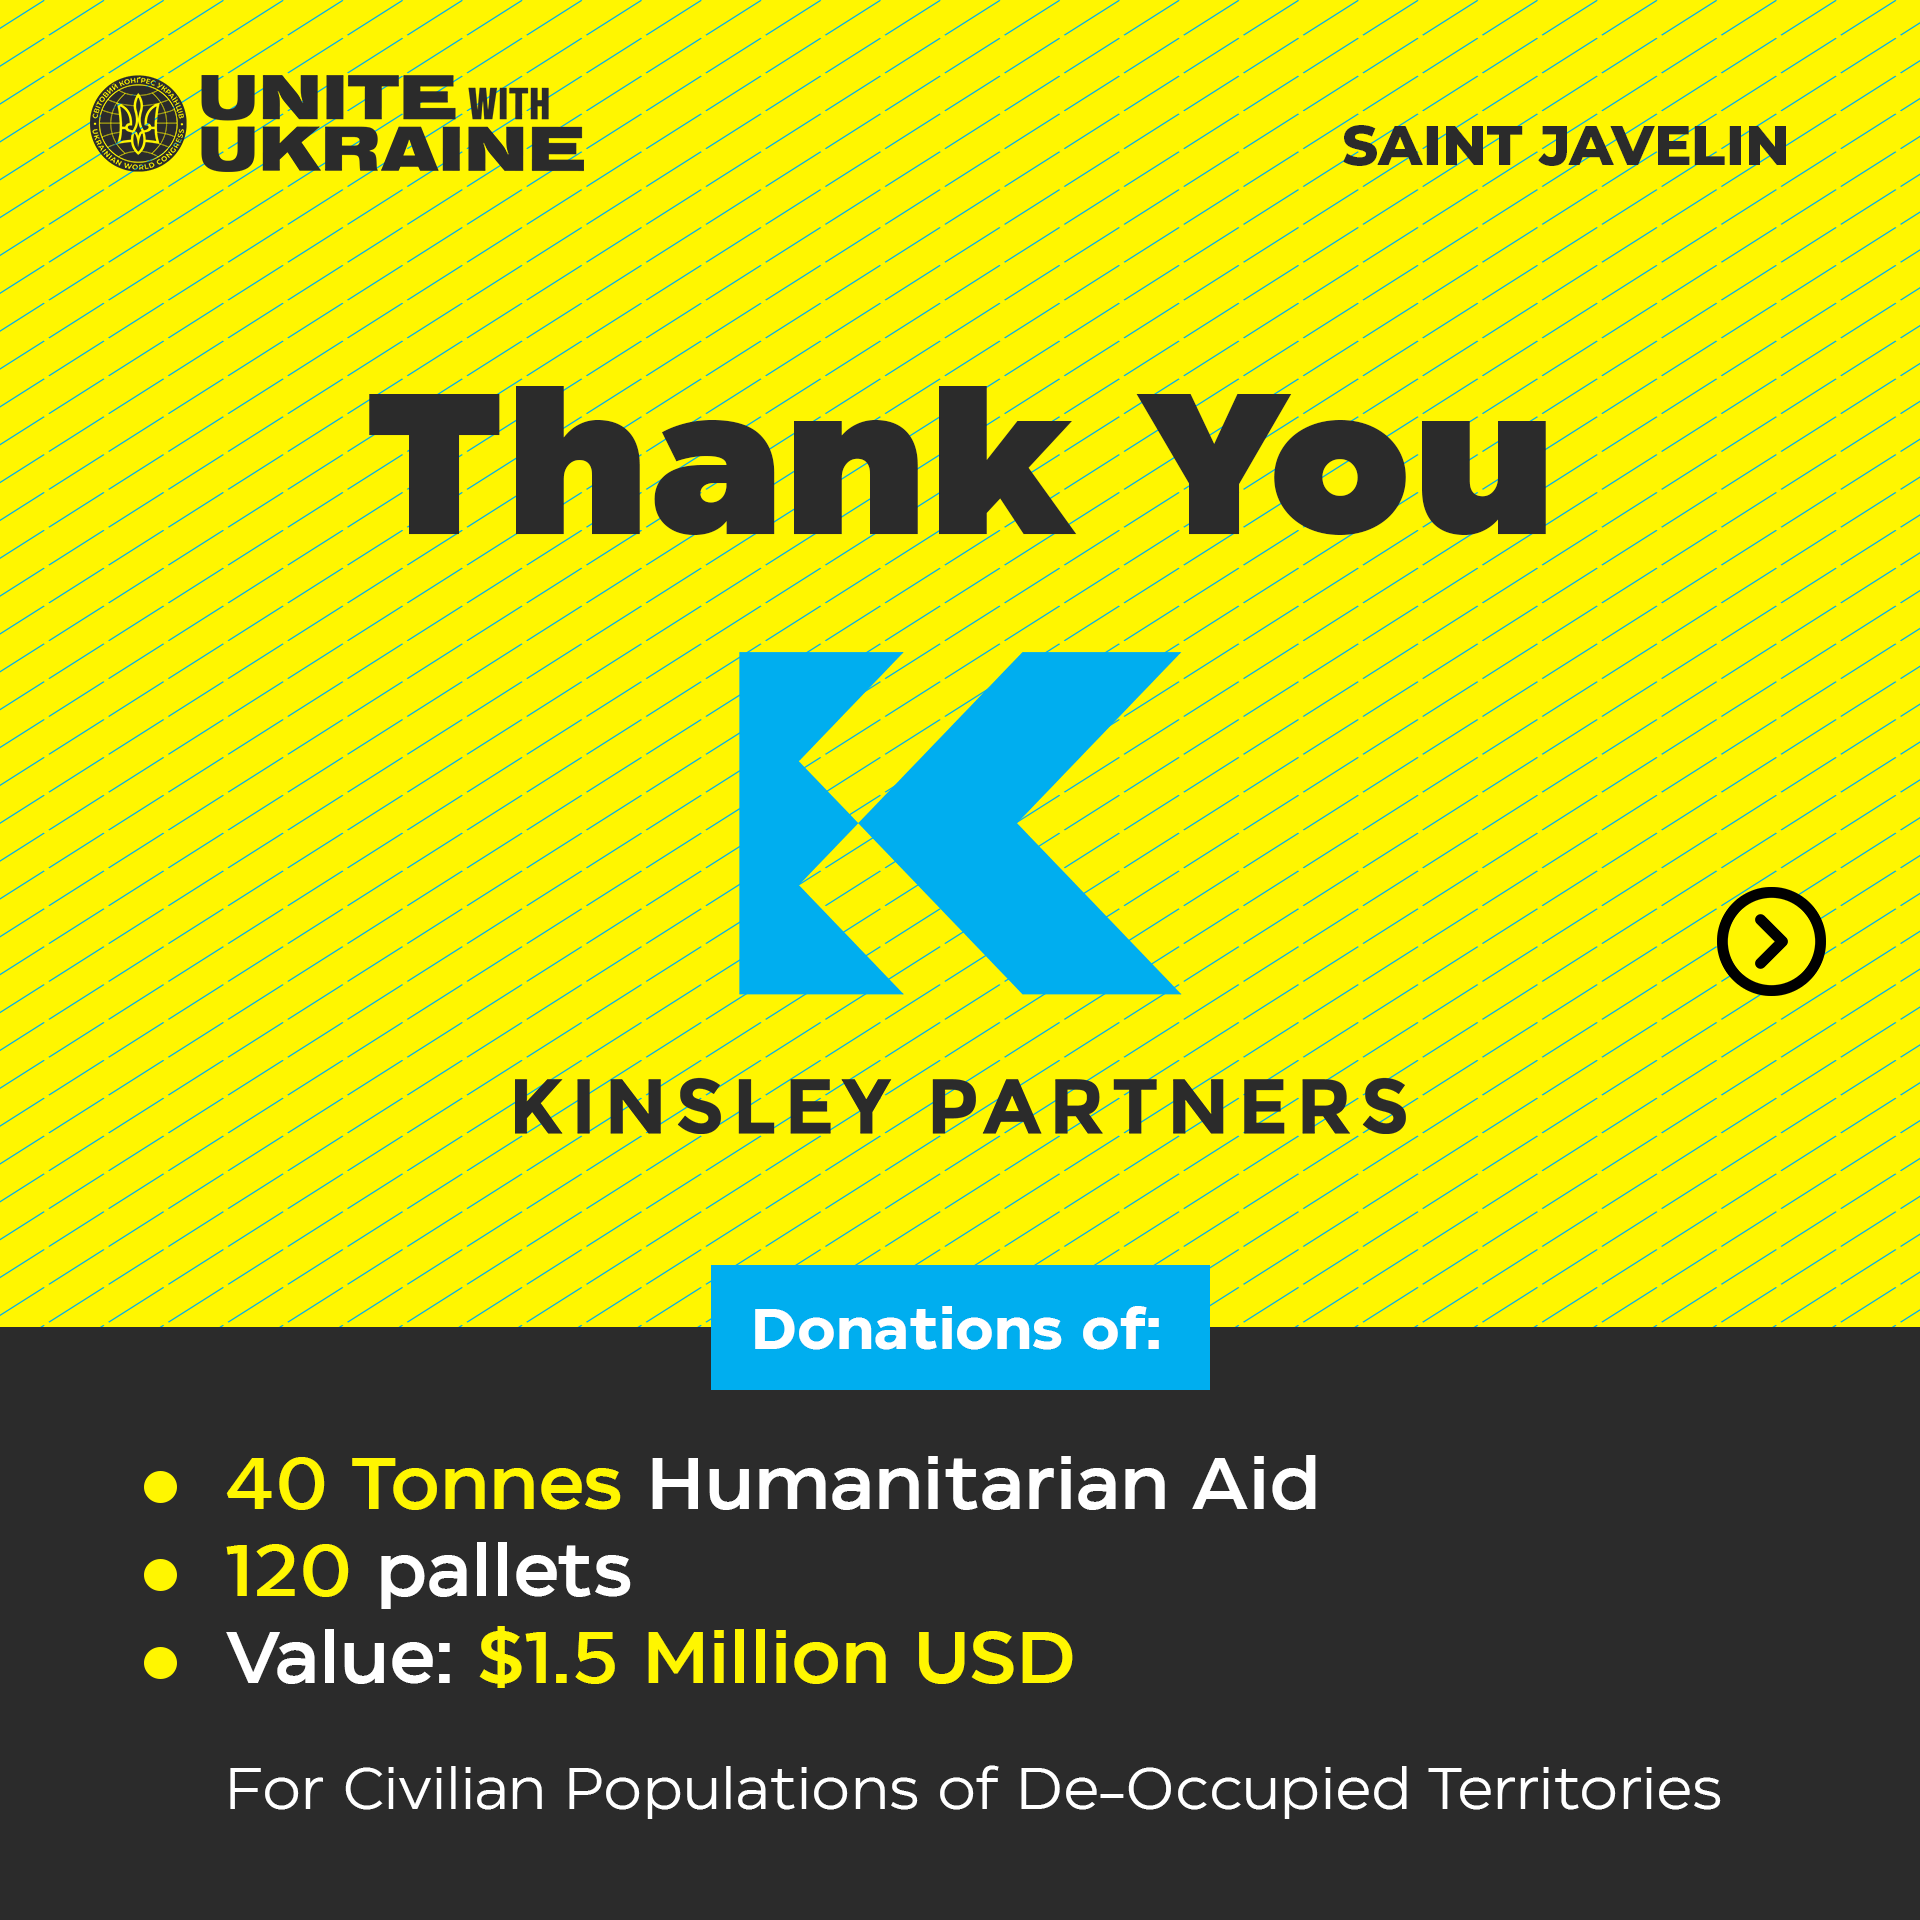 Thank You Kinsley Partners for your help